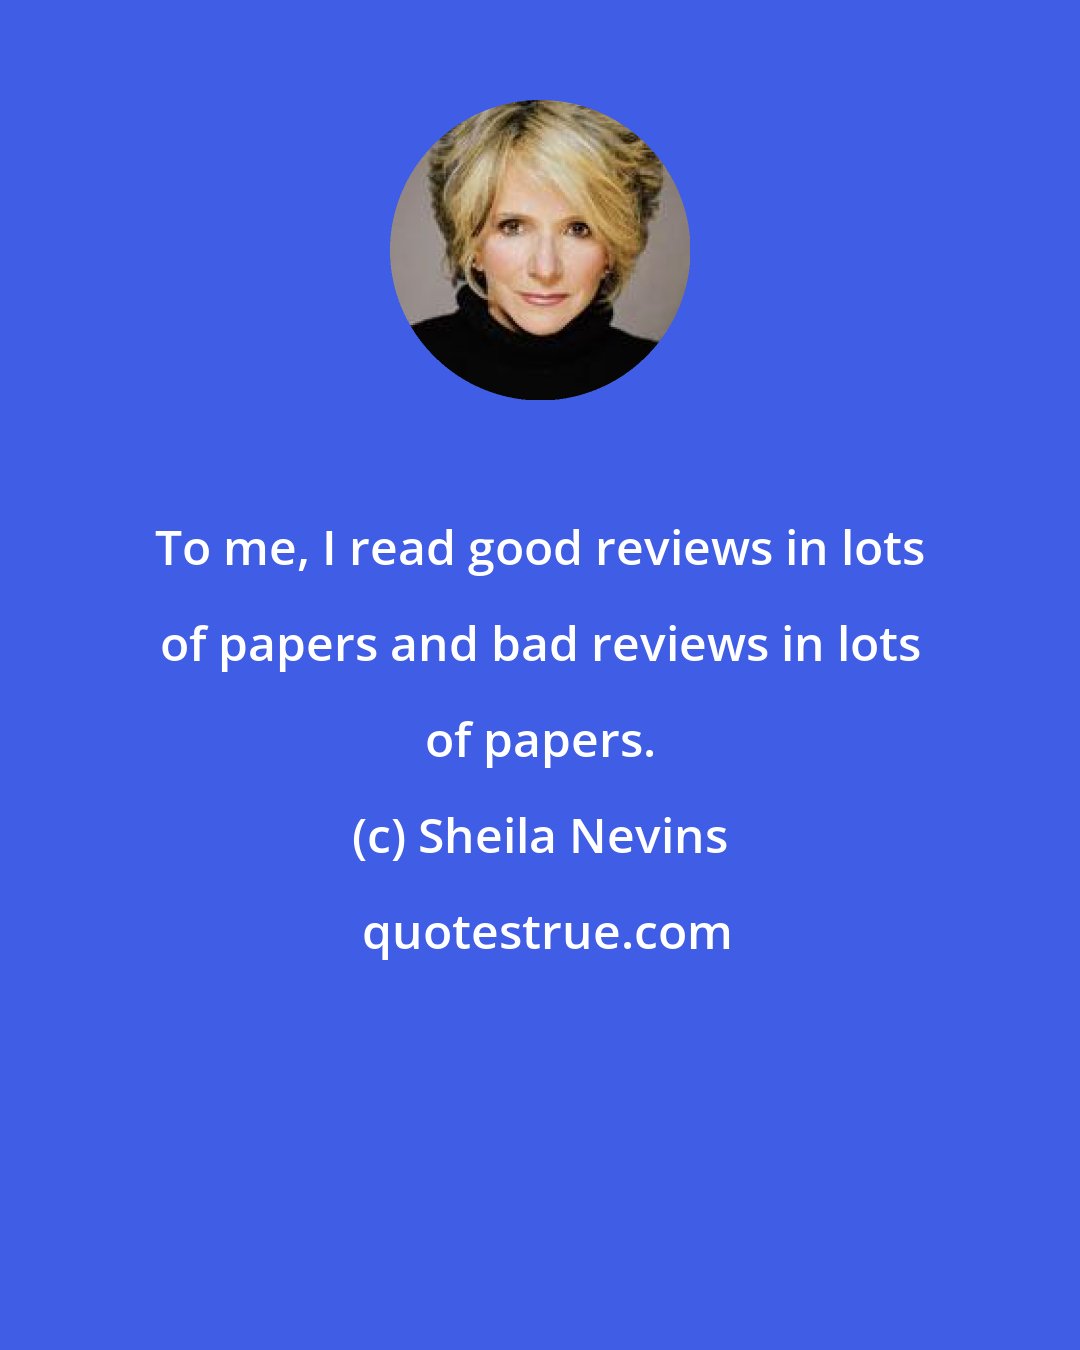 Sheila Nevins: To me, I read good reviews in lots of papers and bad reviews in lots of papers.